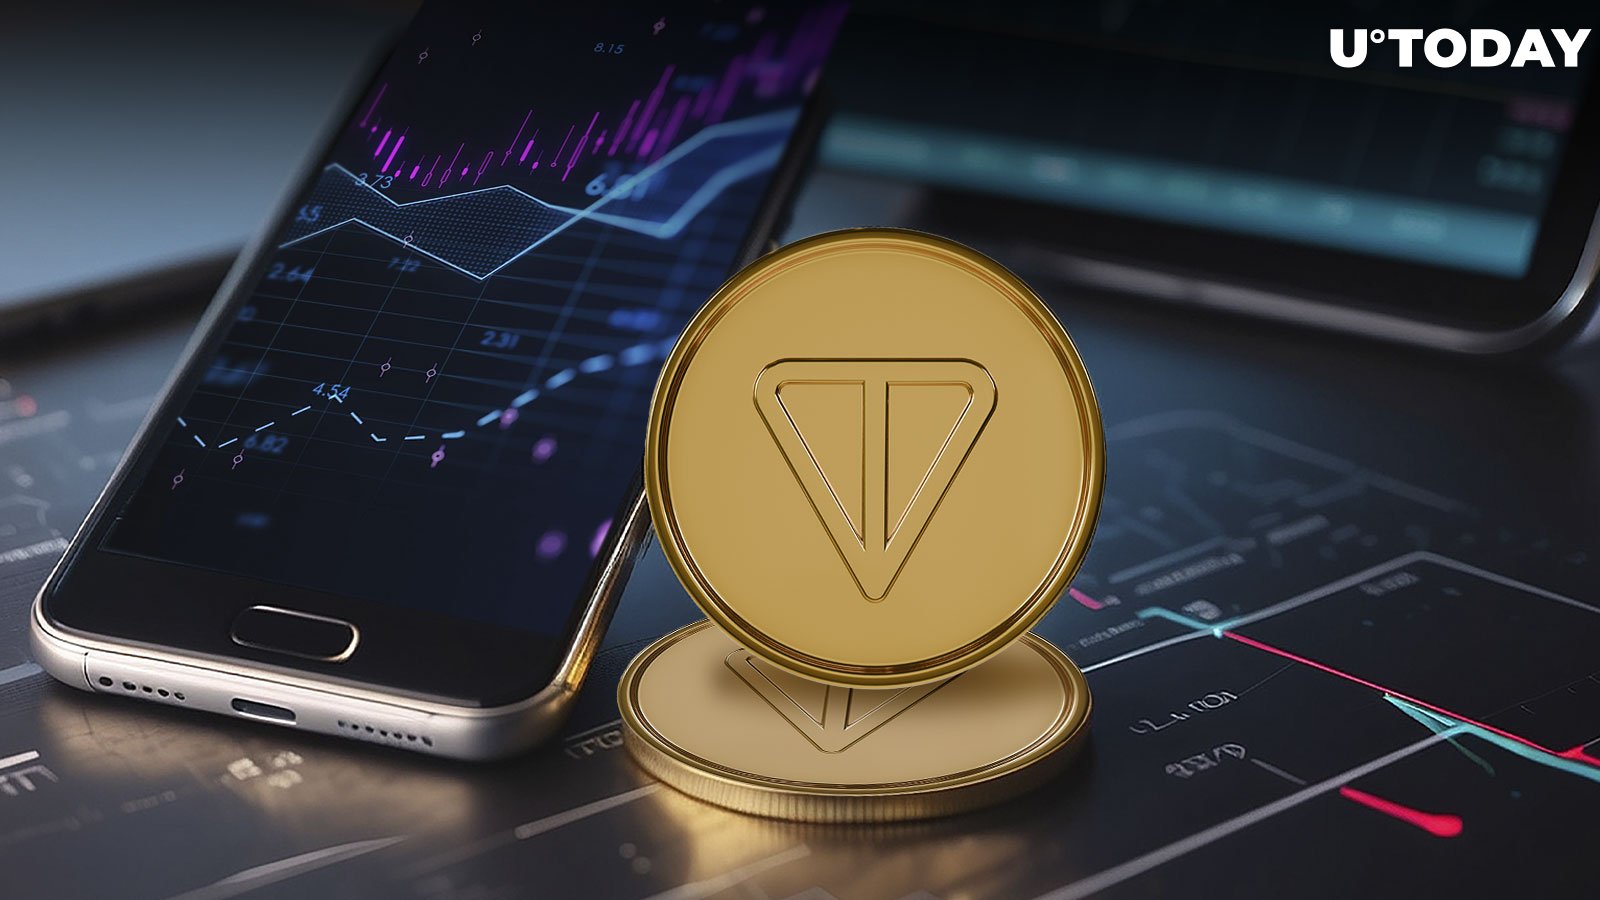 Toncoin (TON) Price Soars 11% After Major Hedge Fund Backing